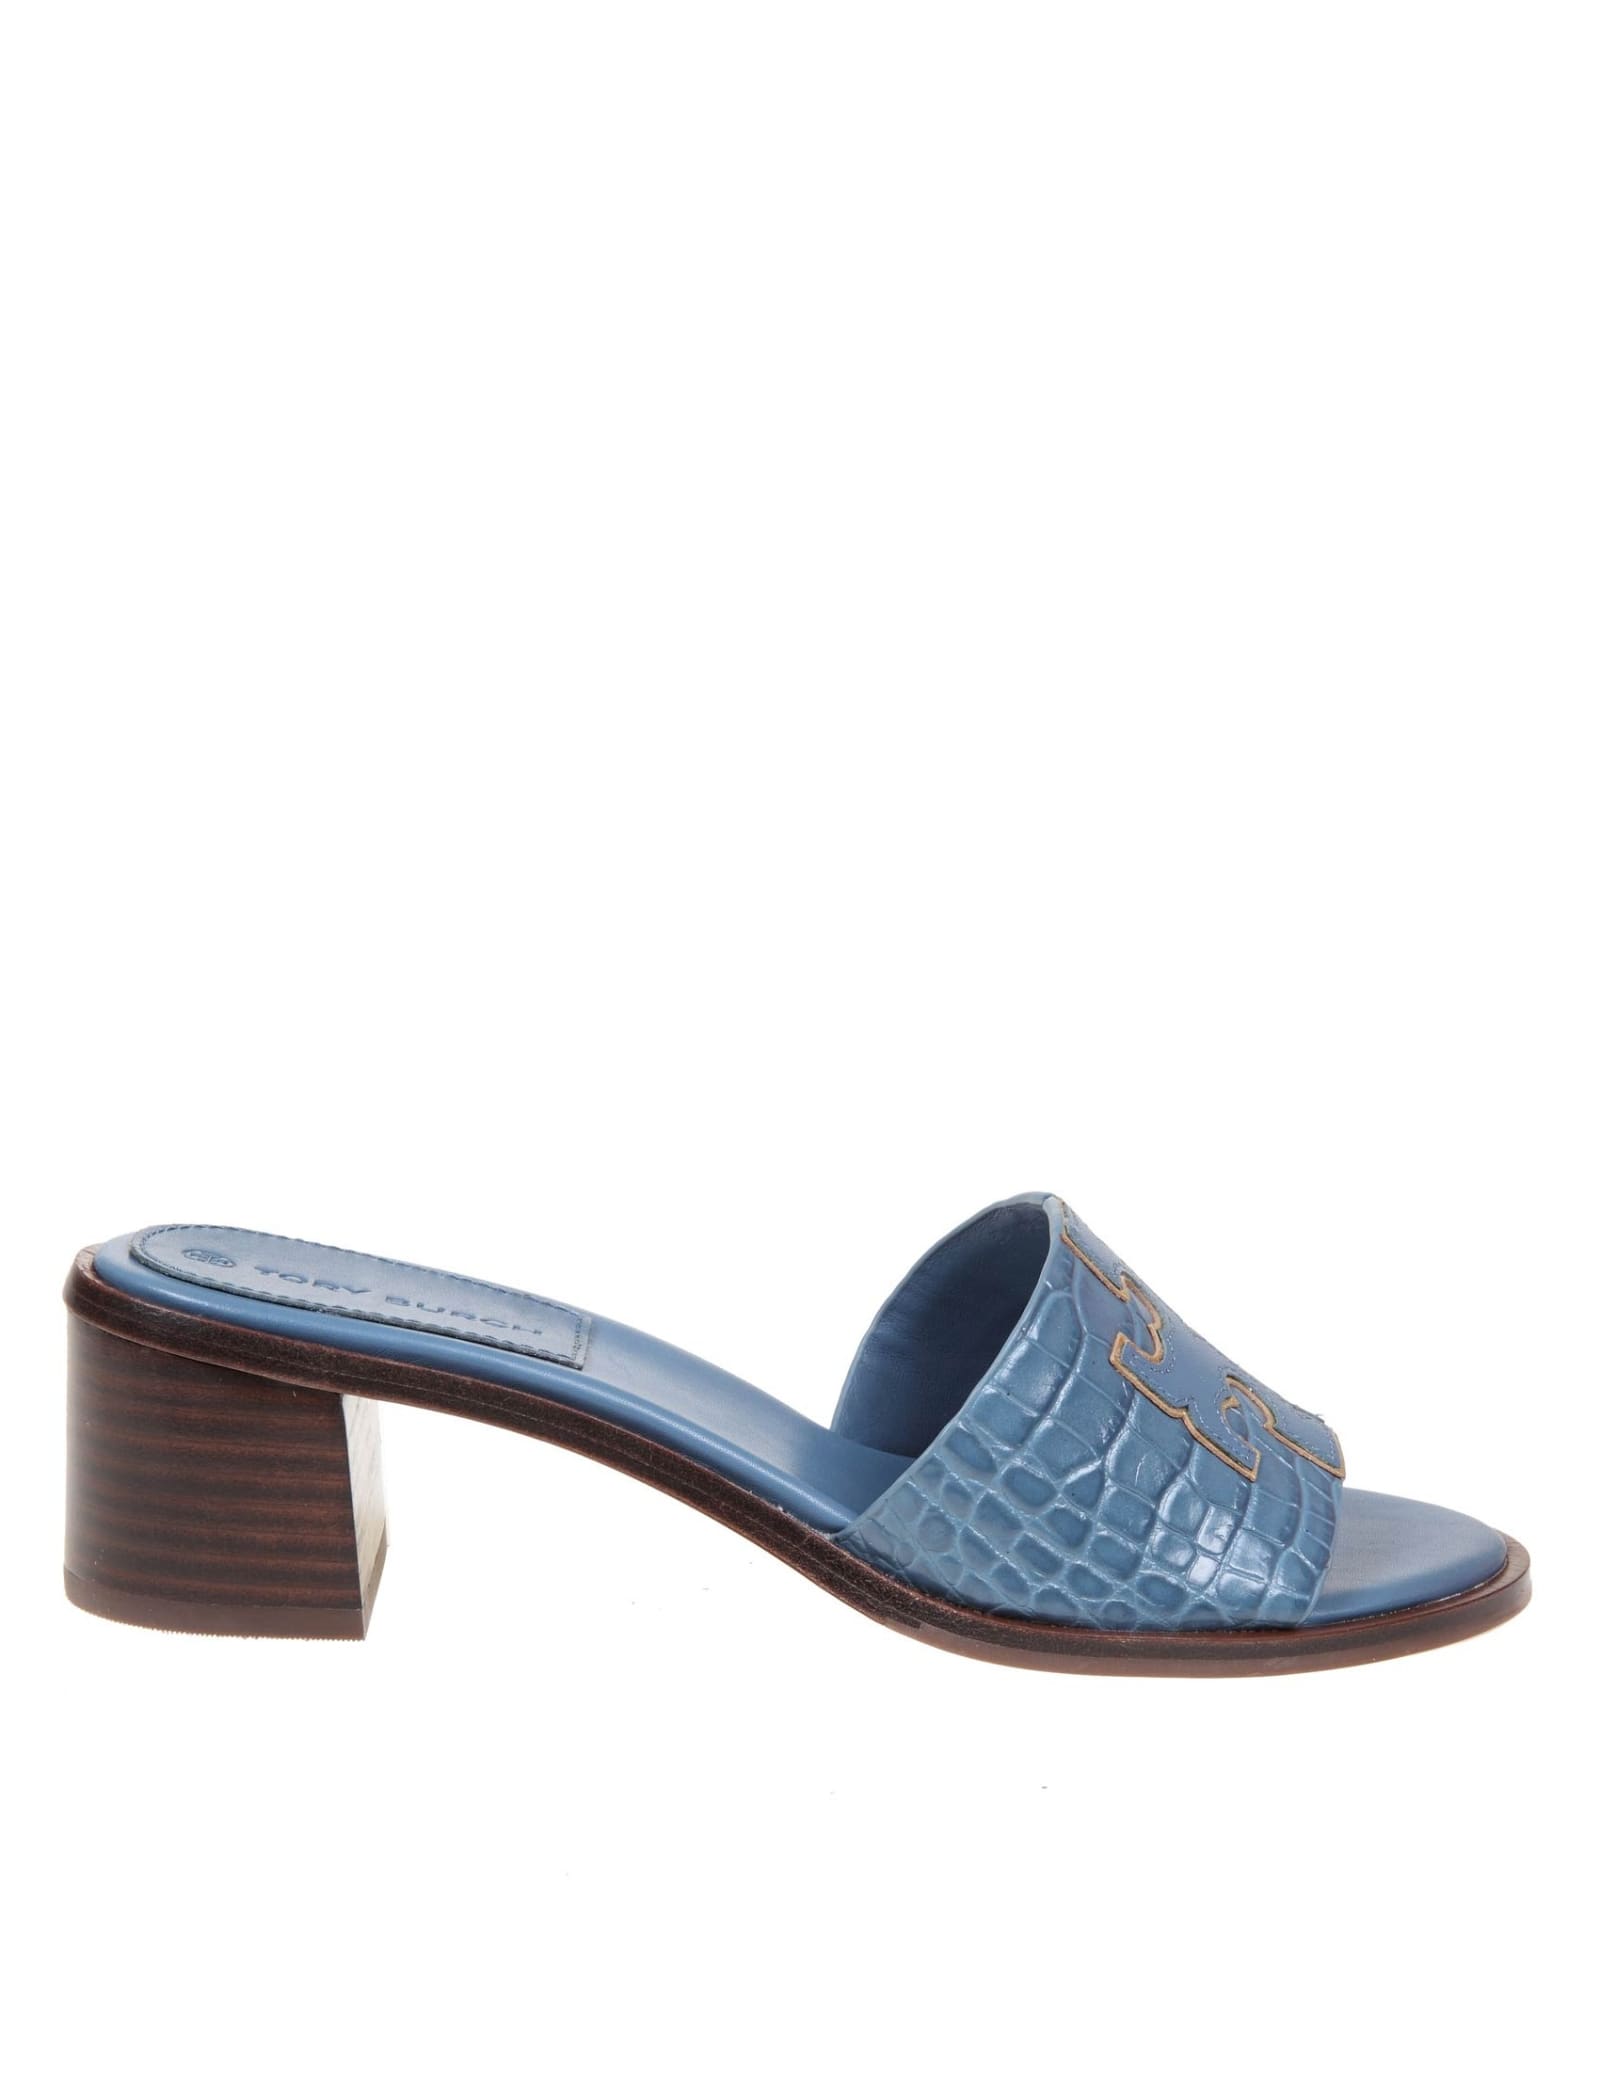 Tory Burch Ines Sandal With Coconut Print Band